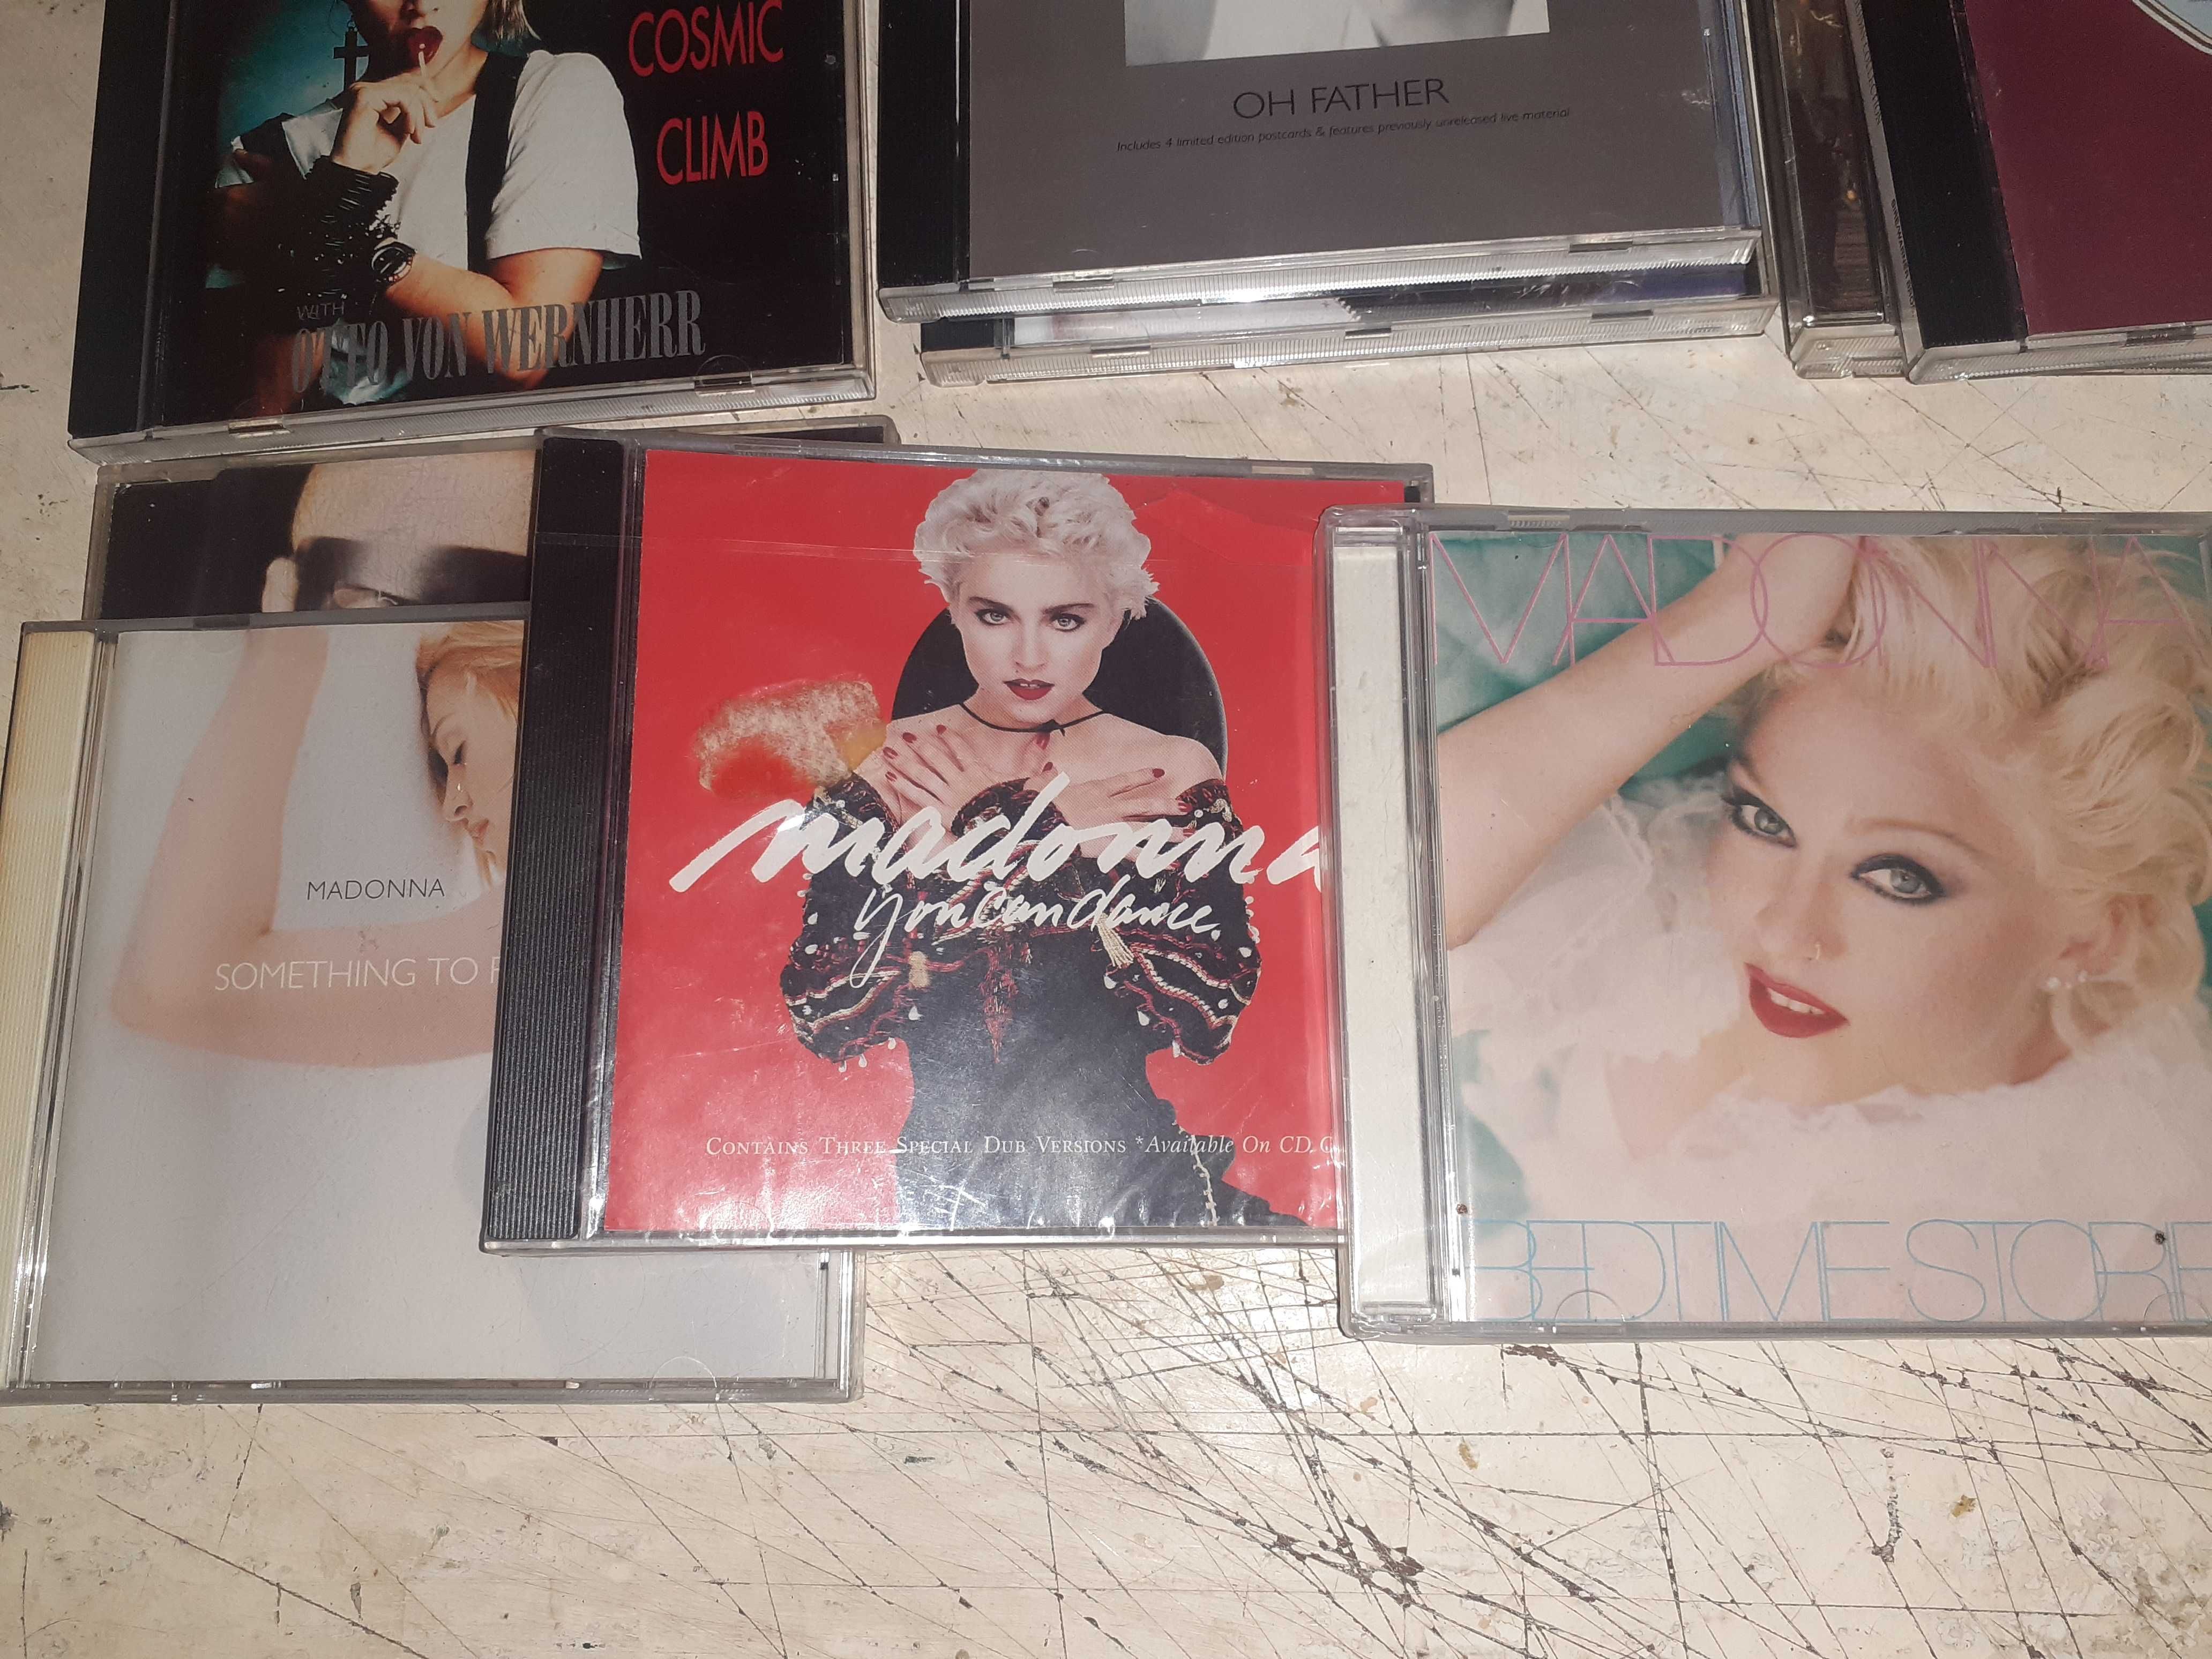 Madonna lote CDs e 2 lps